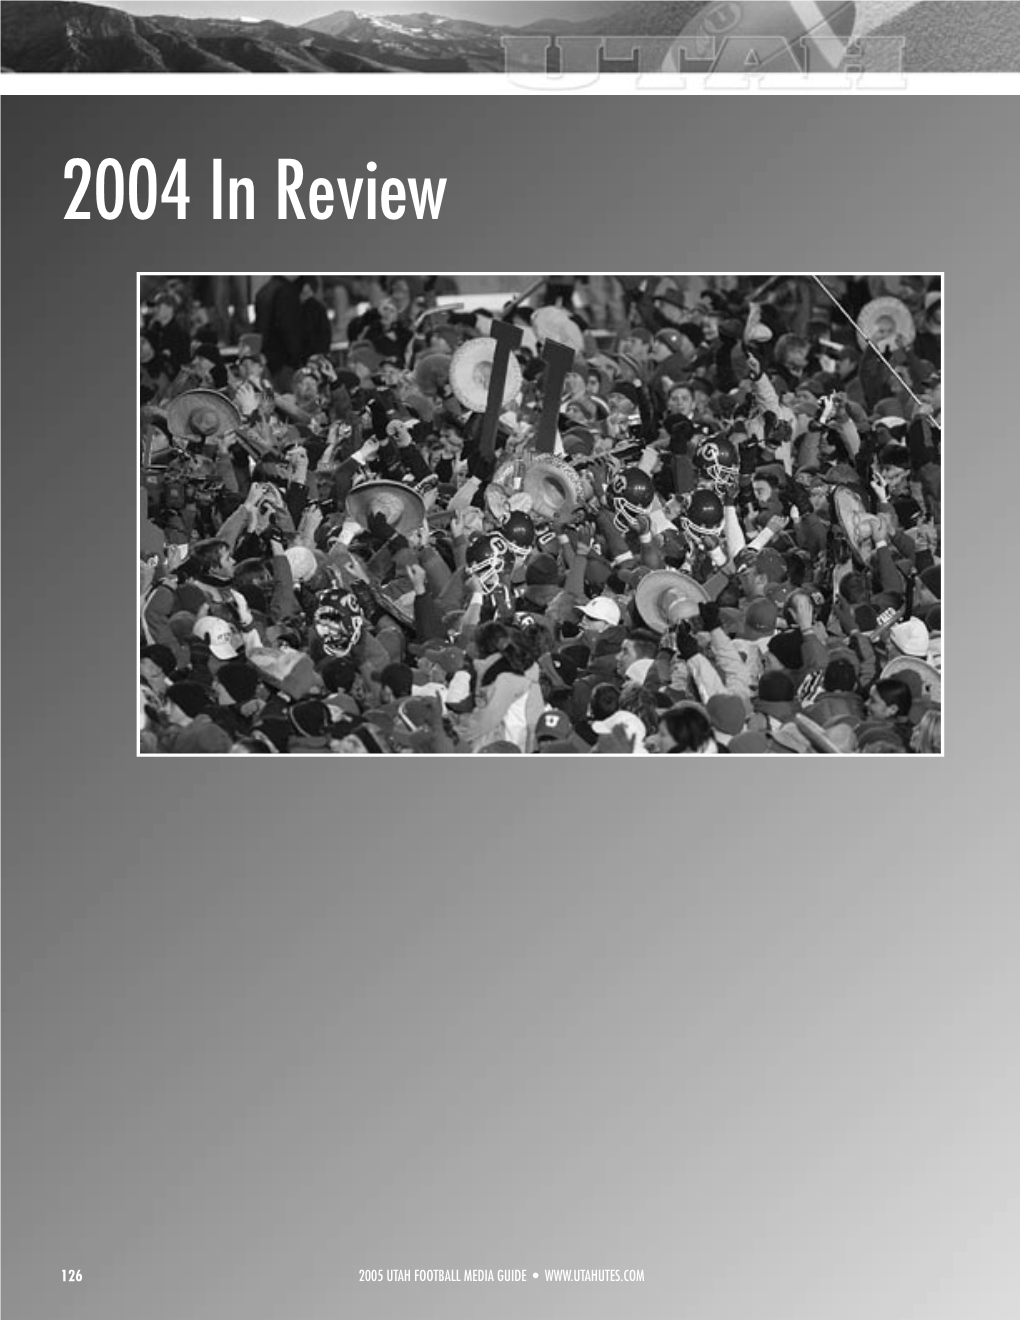 2004 in Review